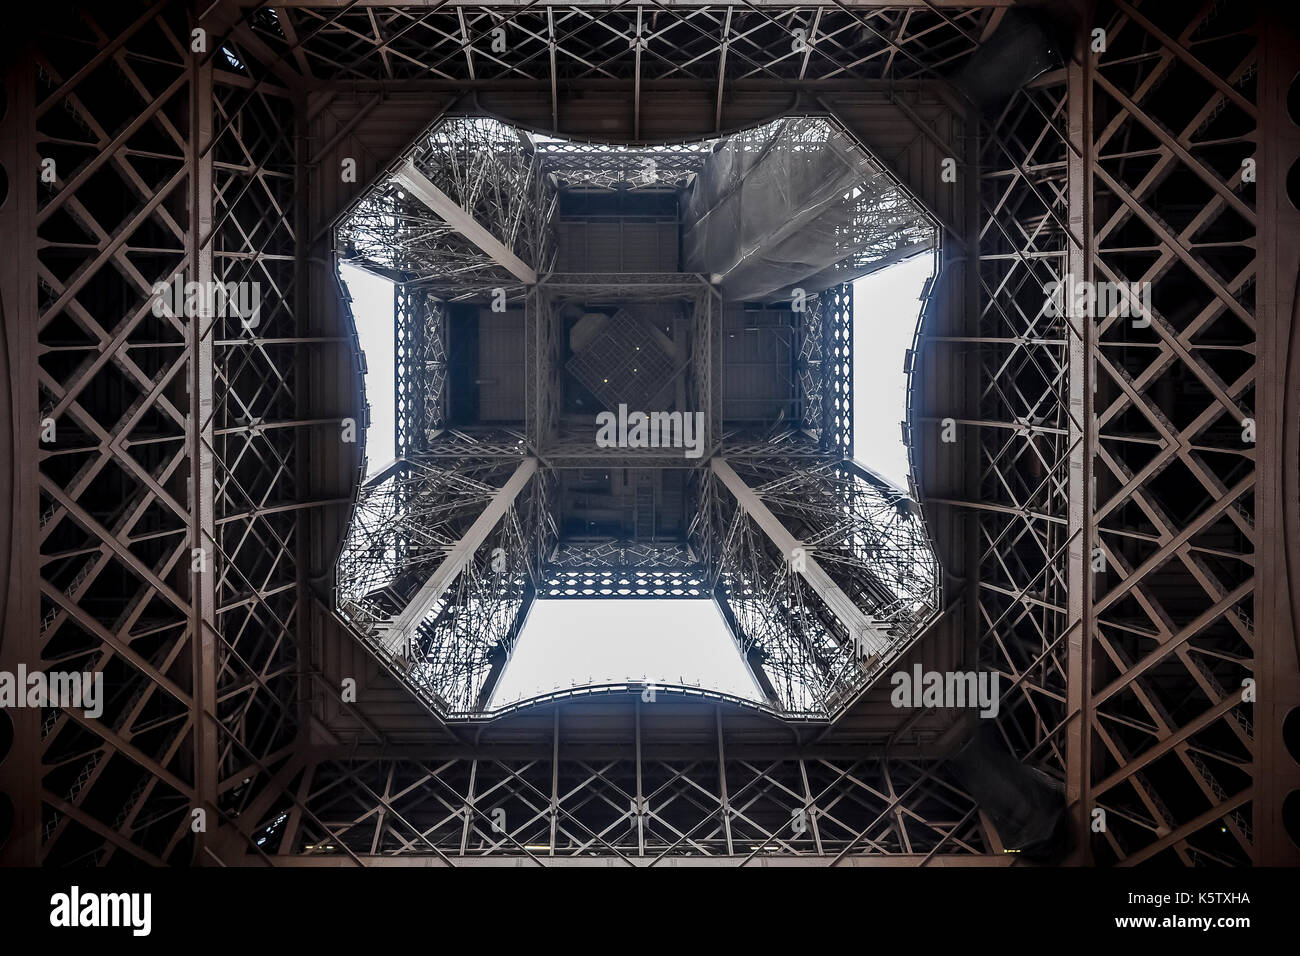 Symmetrical view from under the eiffel tower, showcasing its intricate iron lattice structure. Stock Photo